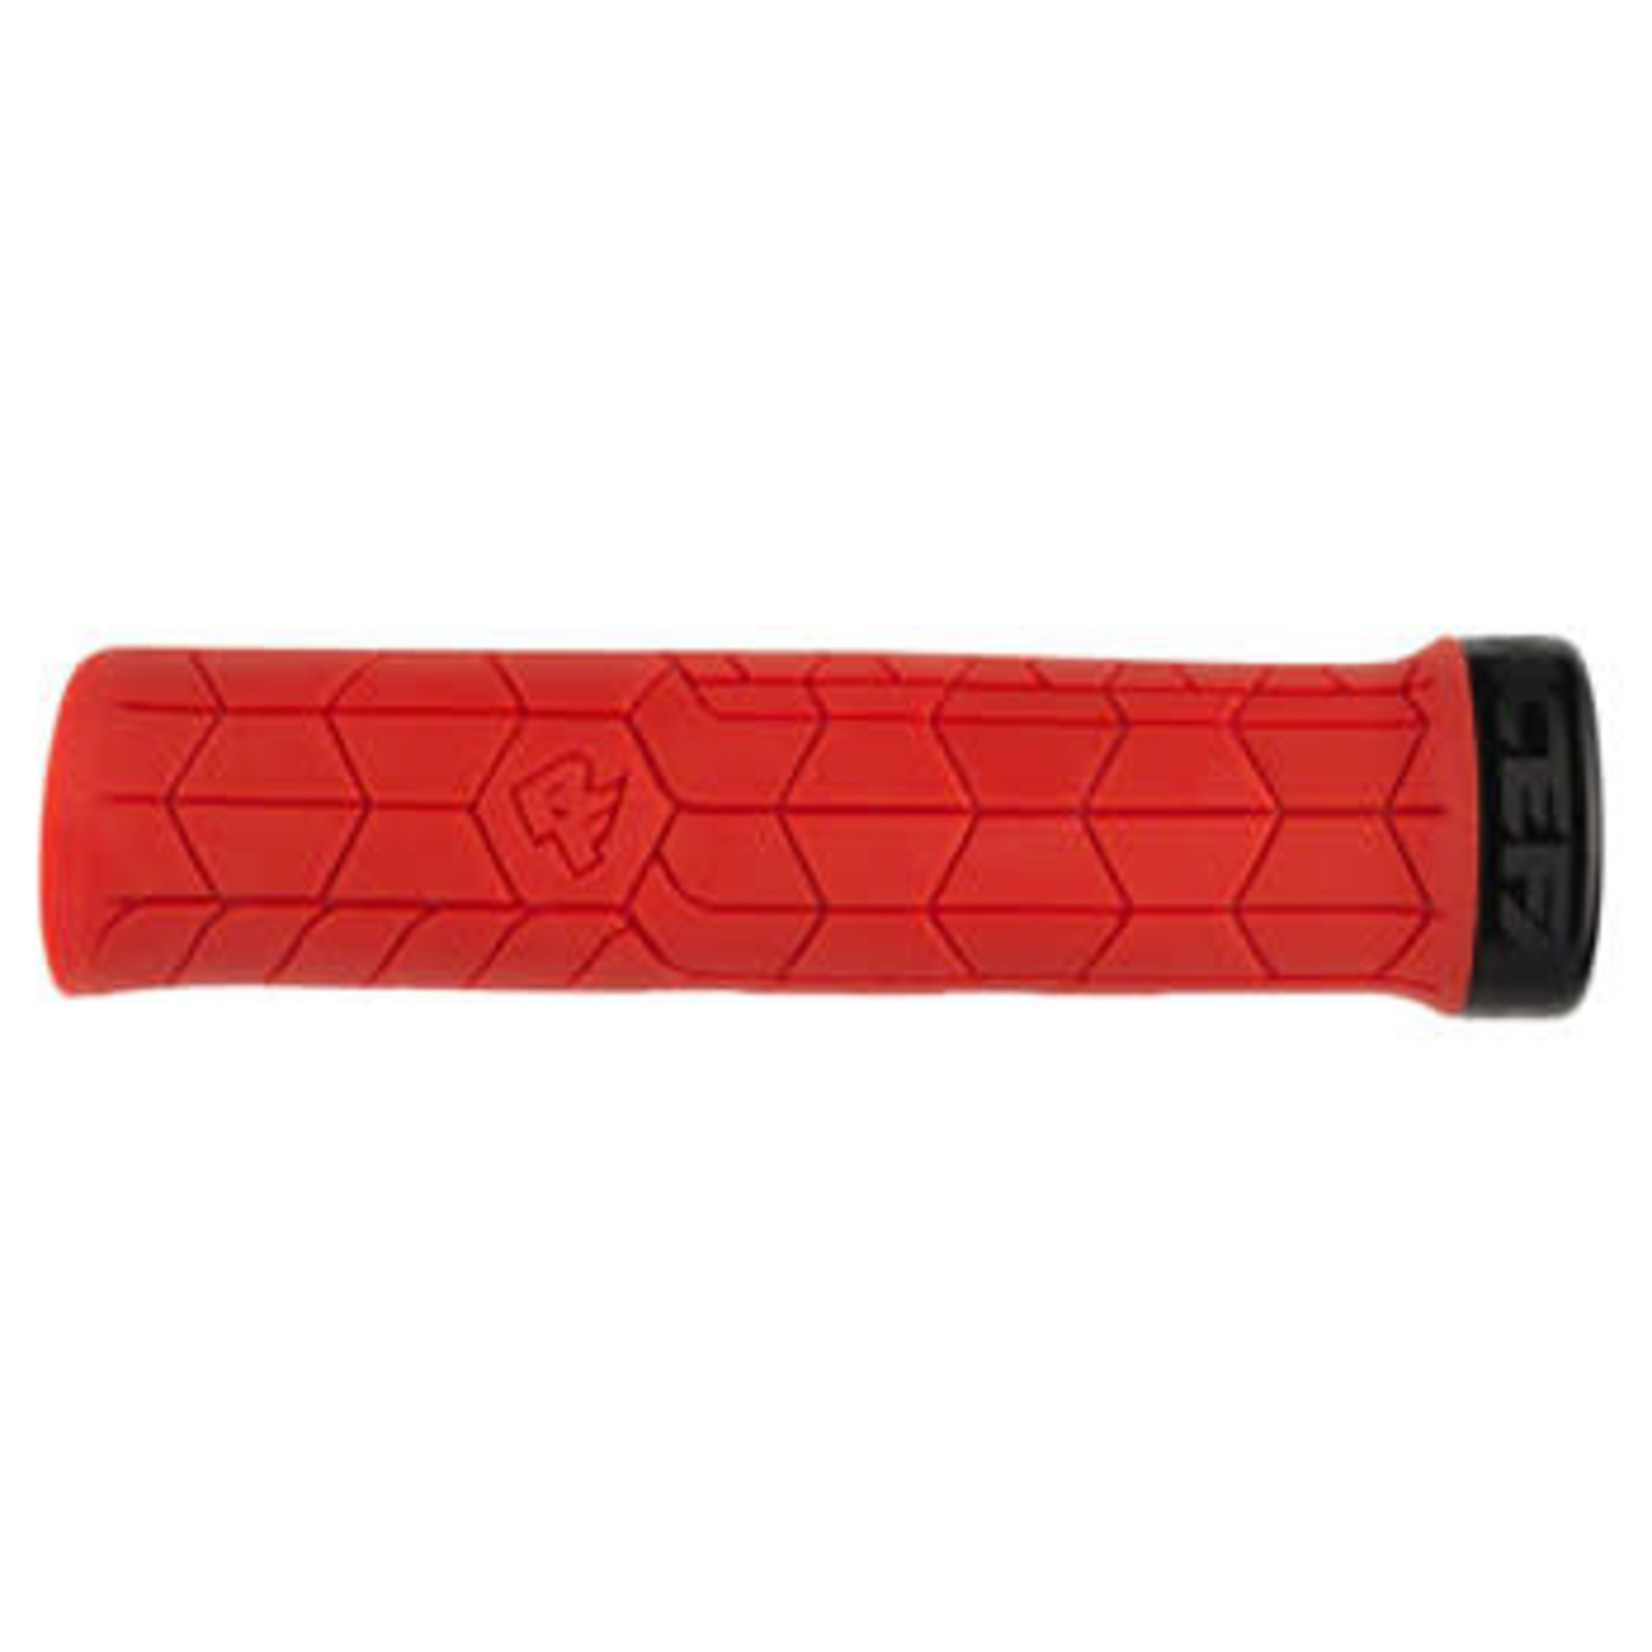 RaceFace RaceFace Getta Grips - Red, Lock-On, 33mm